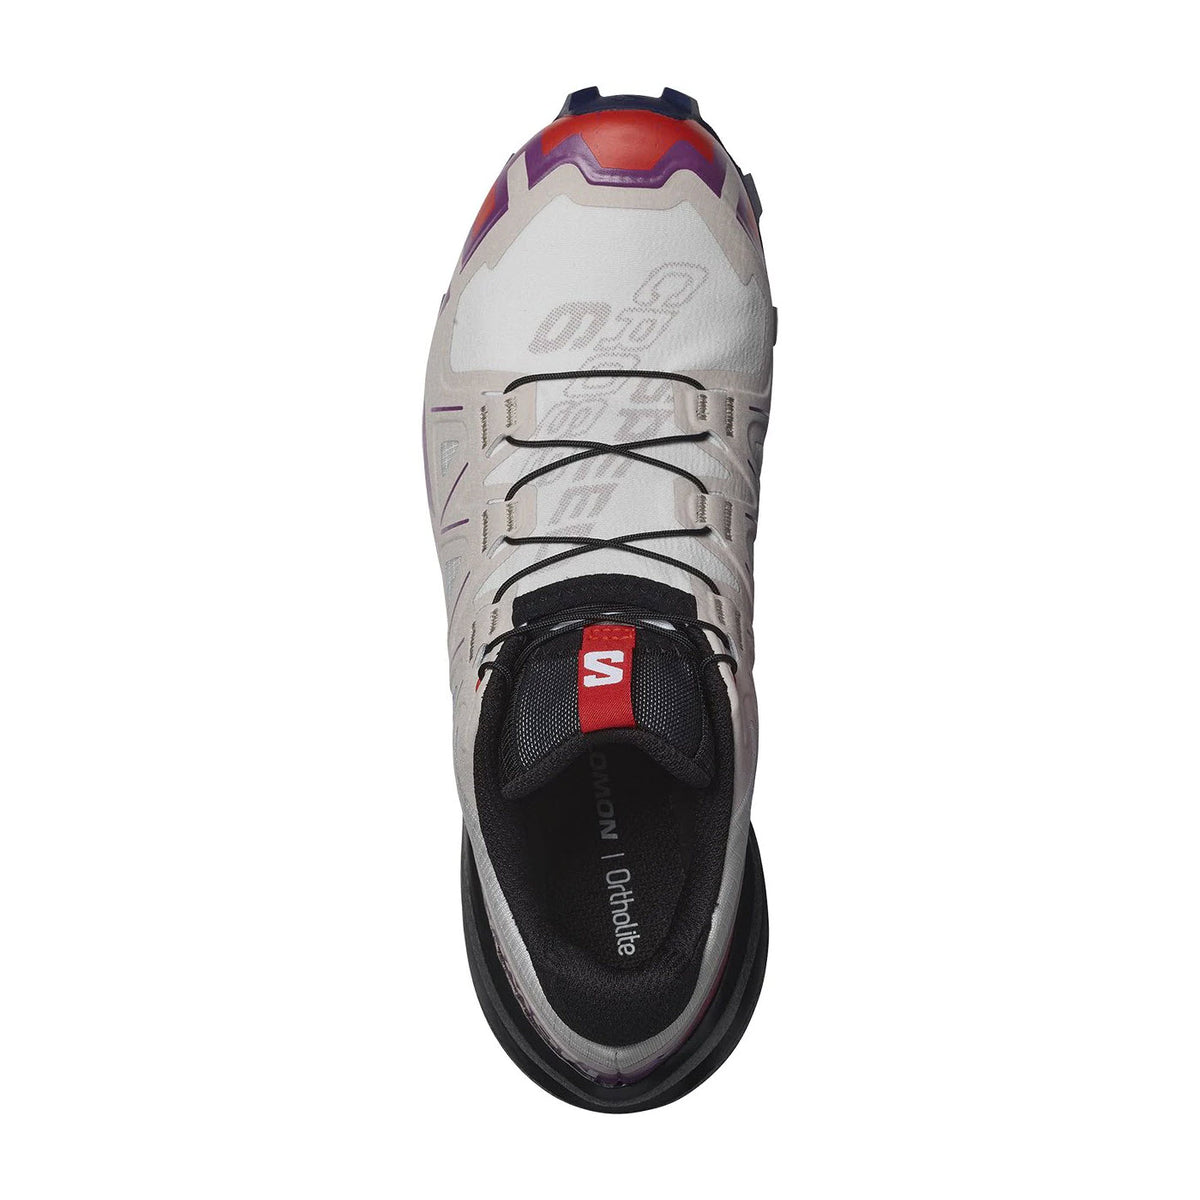 Top view of a gray, white, and purple Salomon SPEEDCROSS 6 trail running shoe with black laces and visible brand logos.